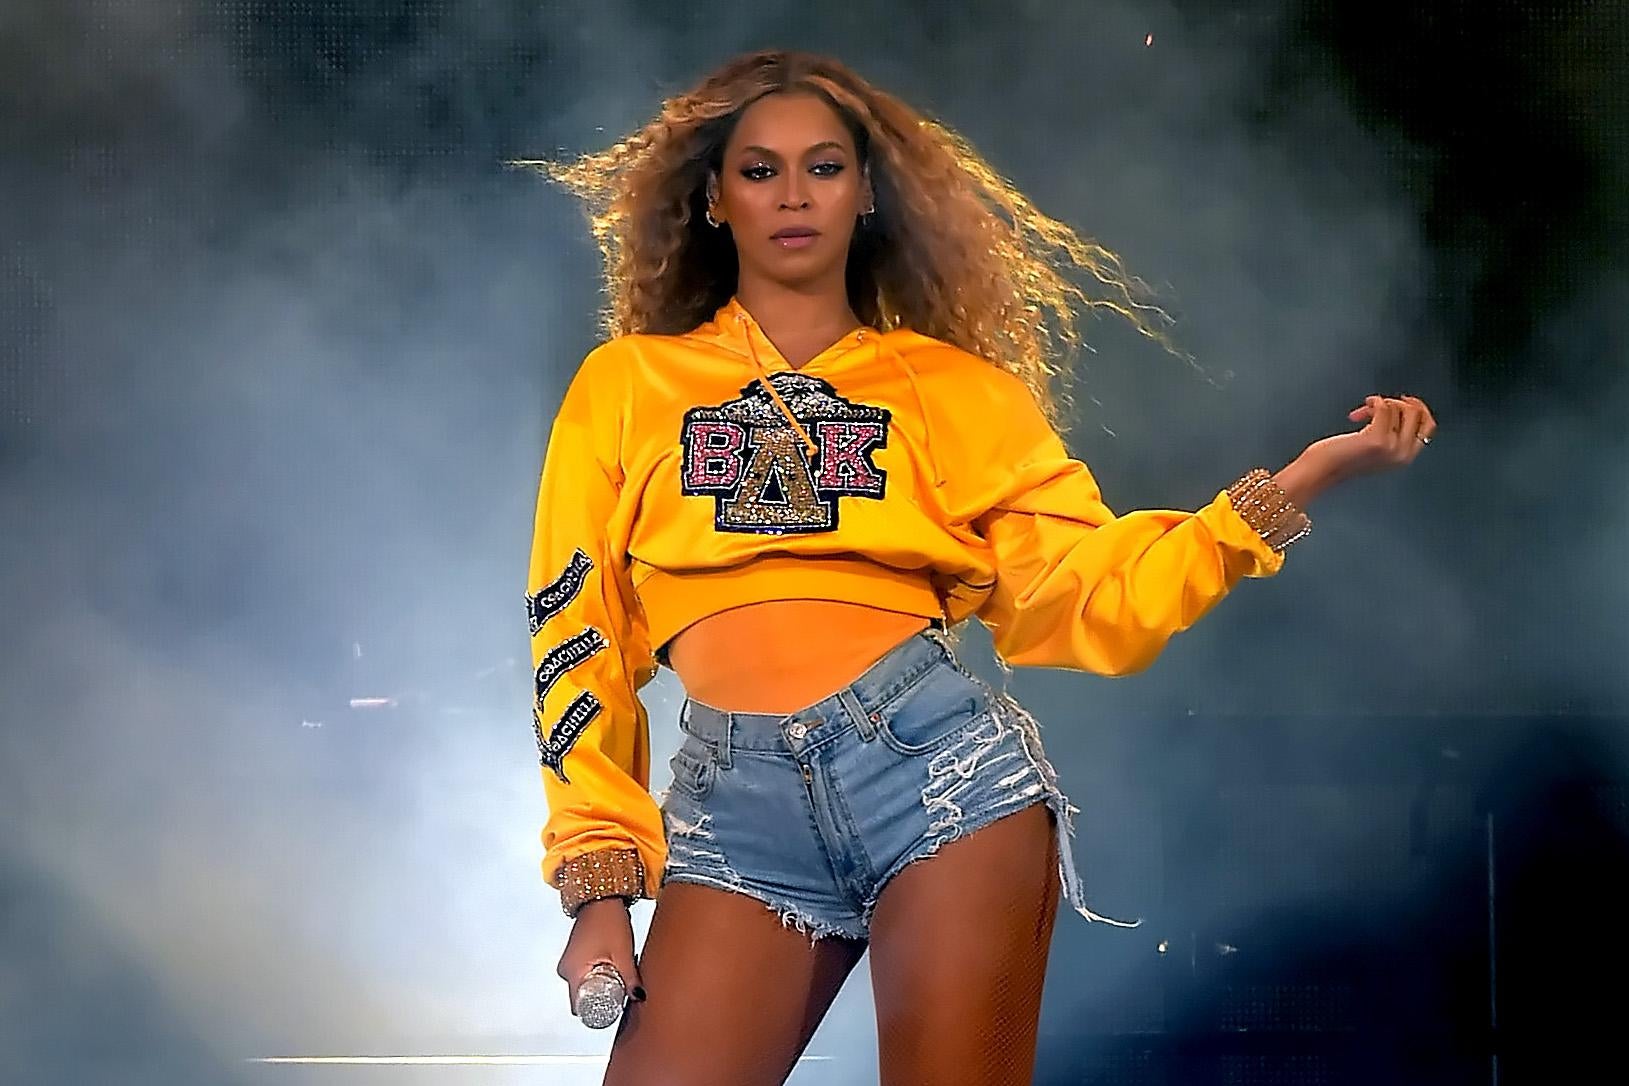 Beyonce on stage at Coachella. 